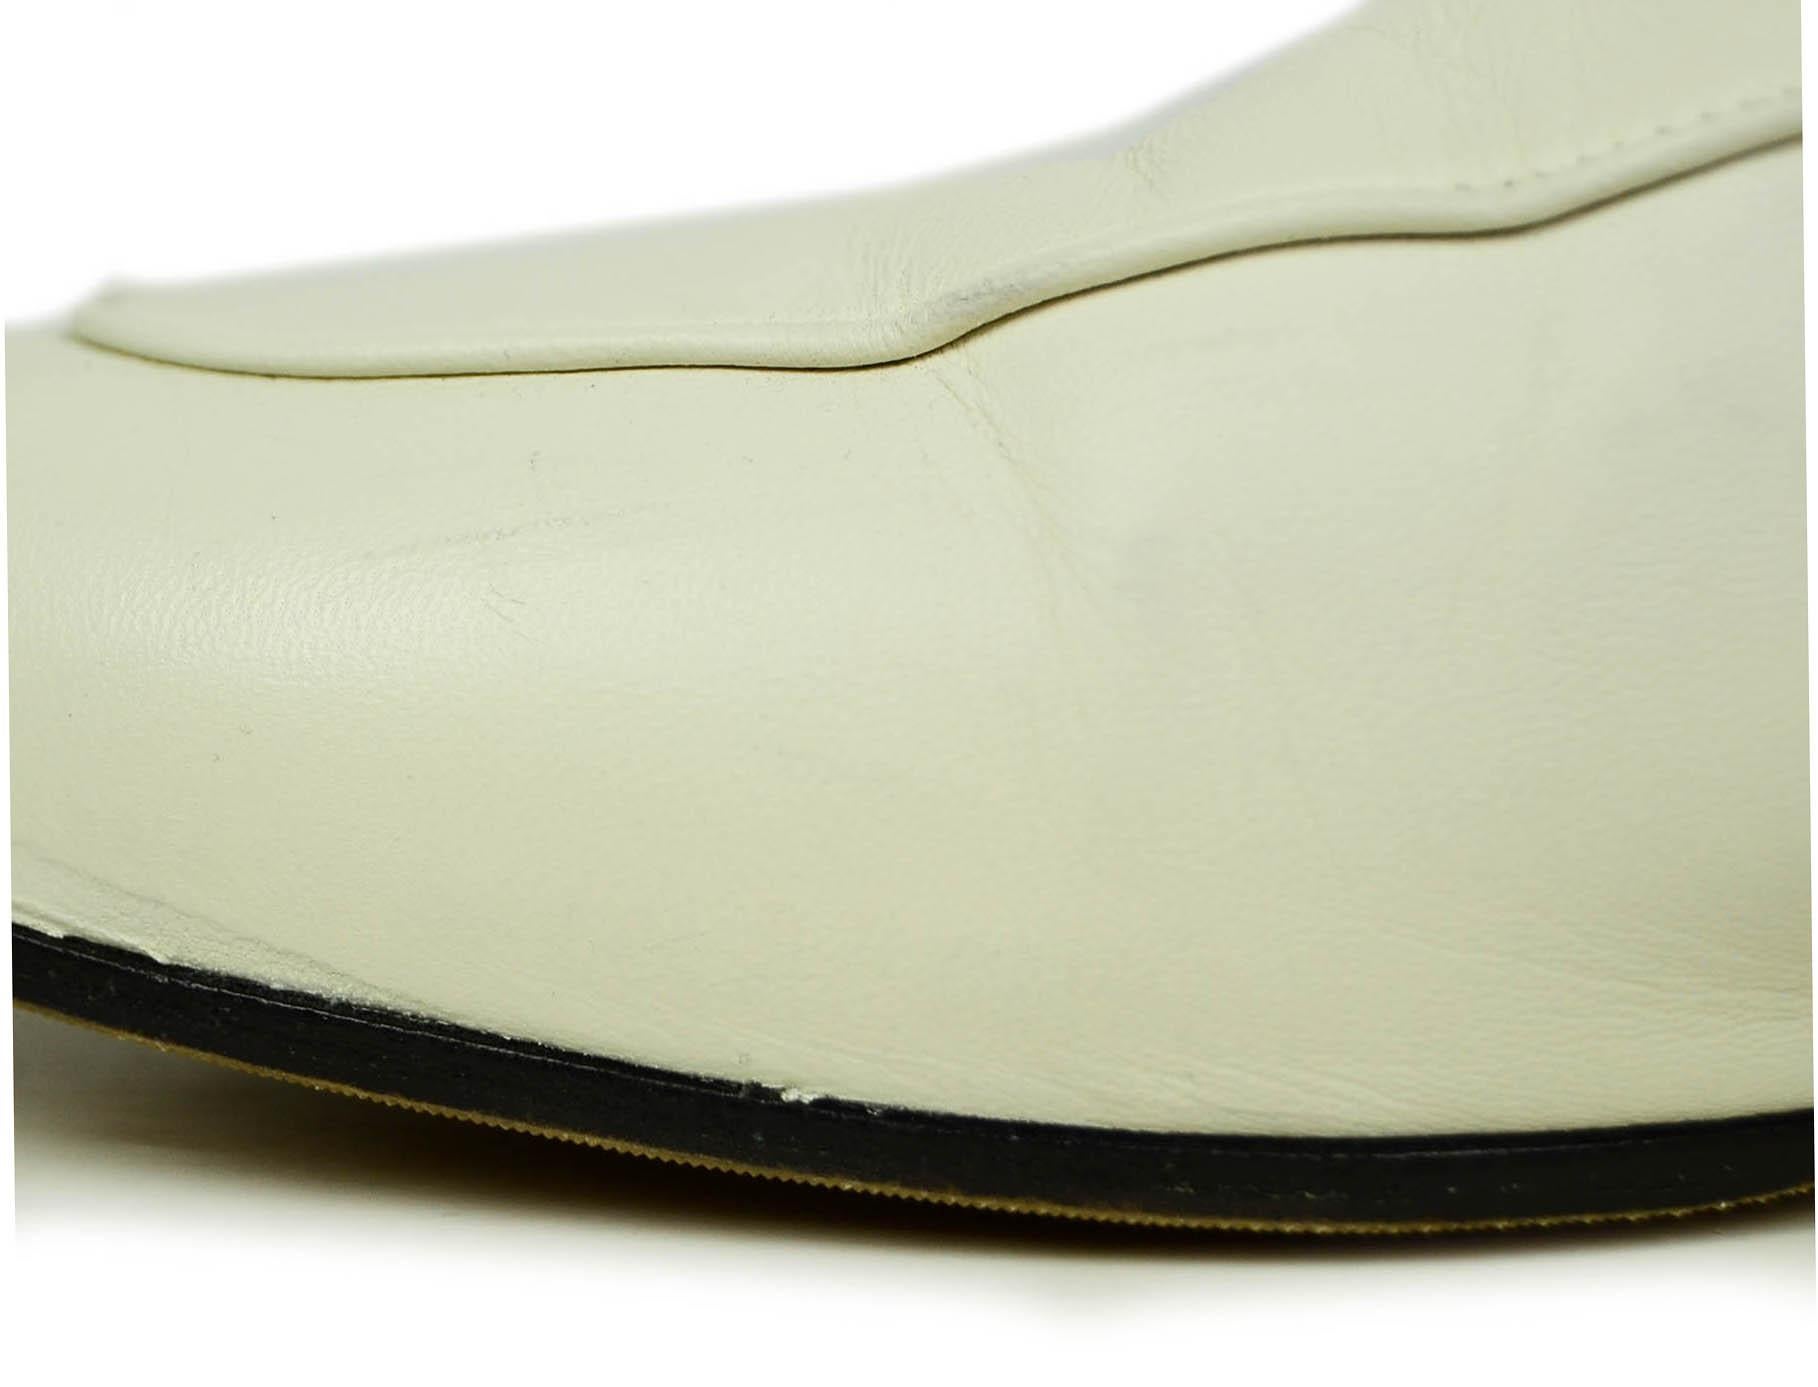 Gucci White Princetown Loafer Mules sz 39.5 5